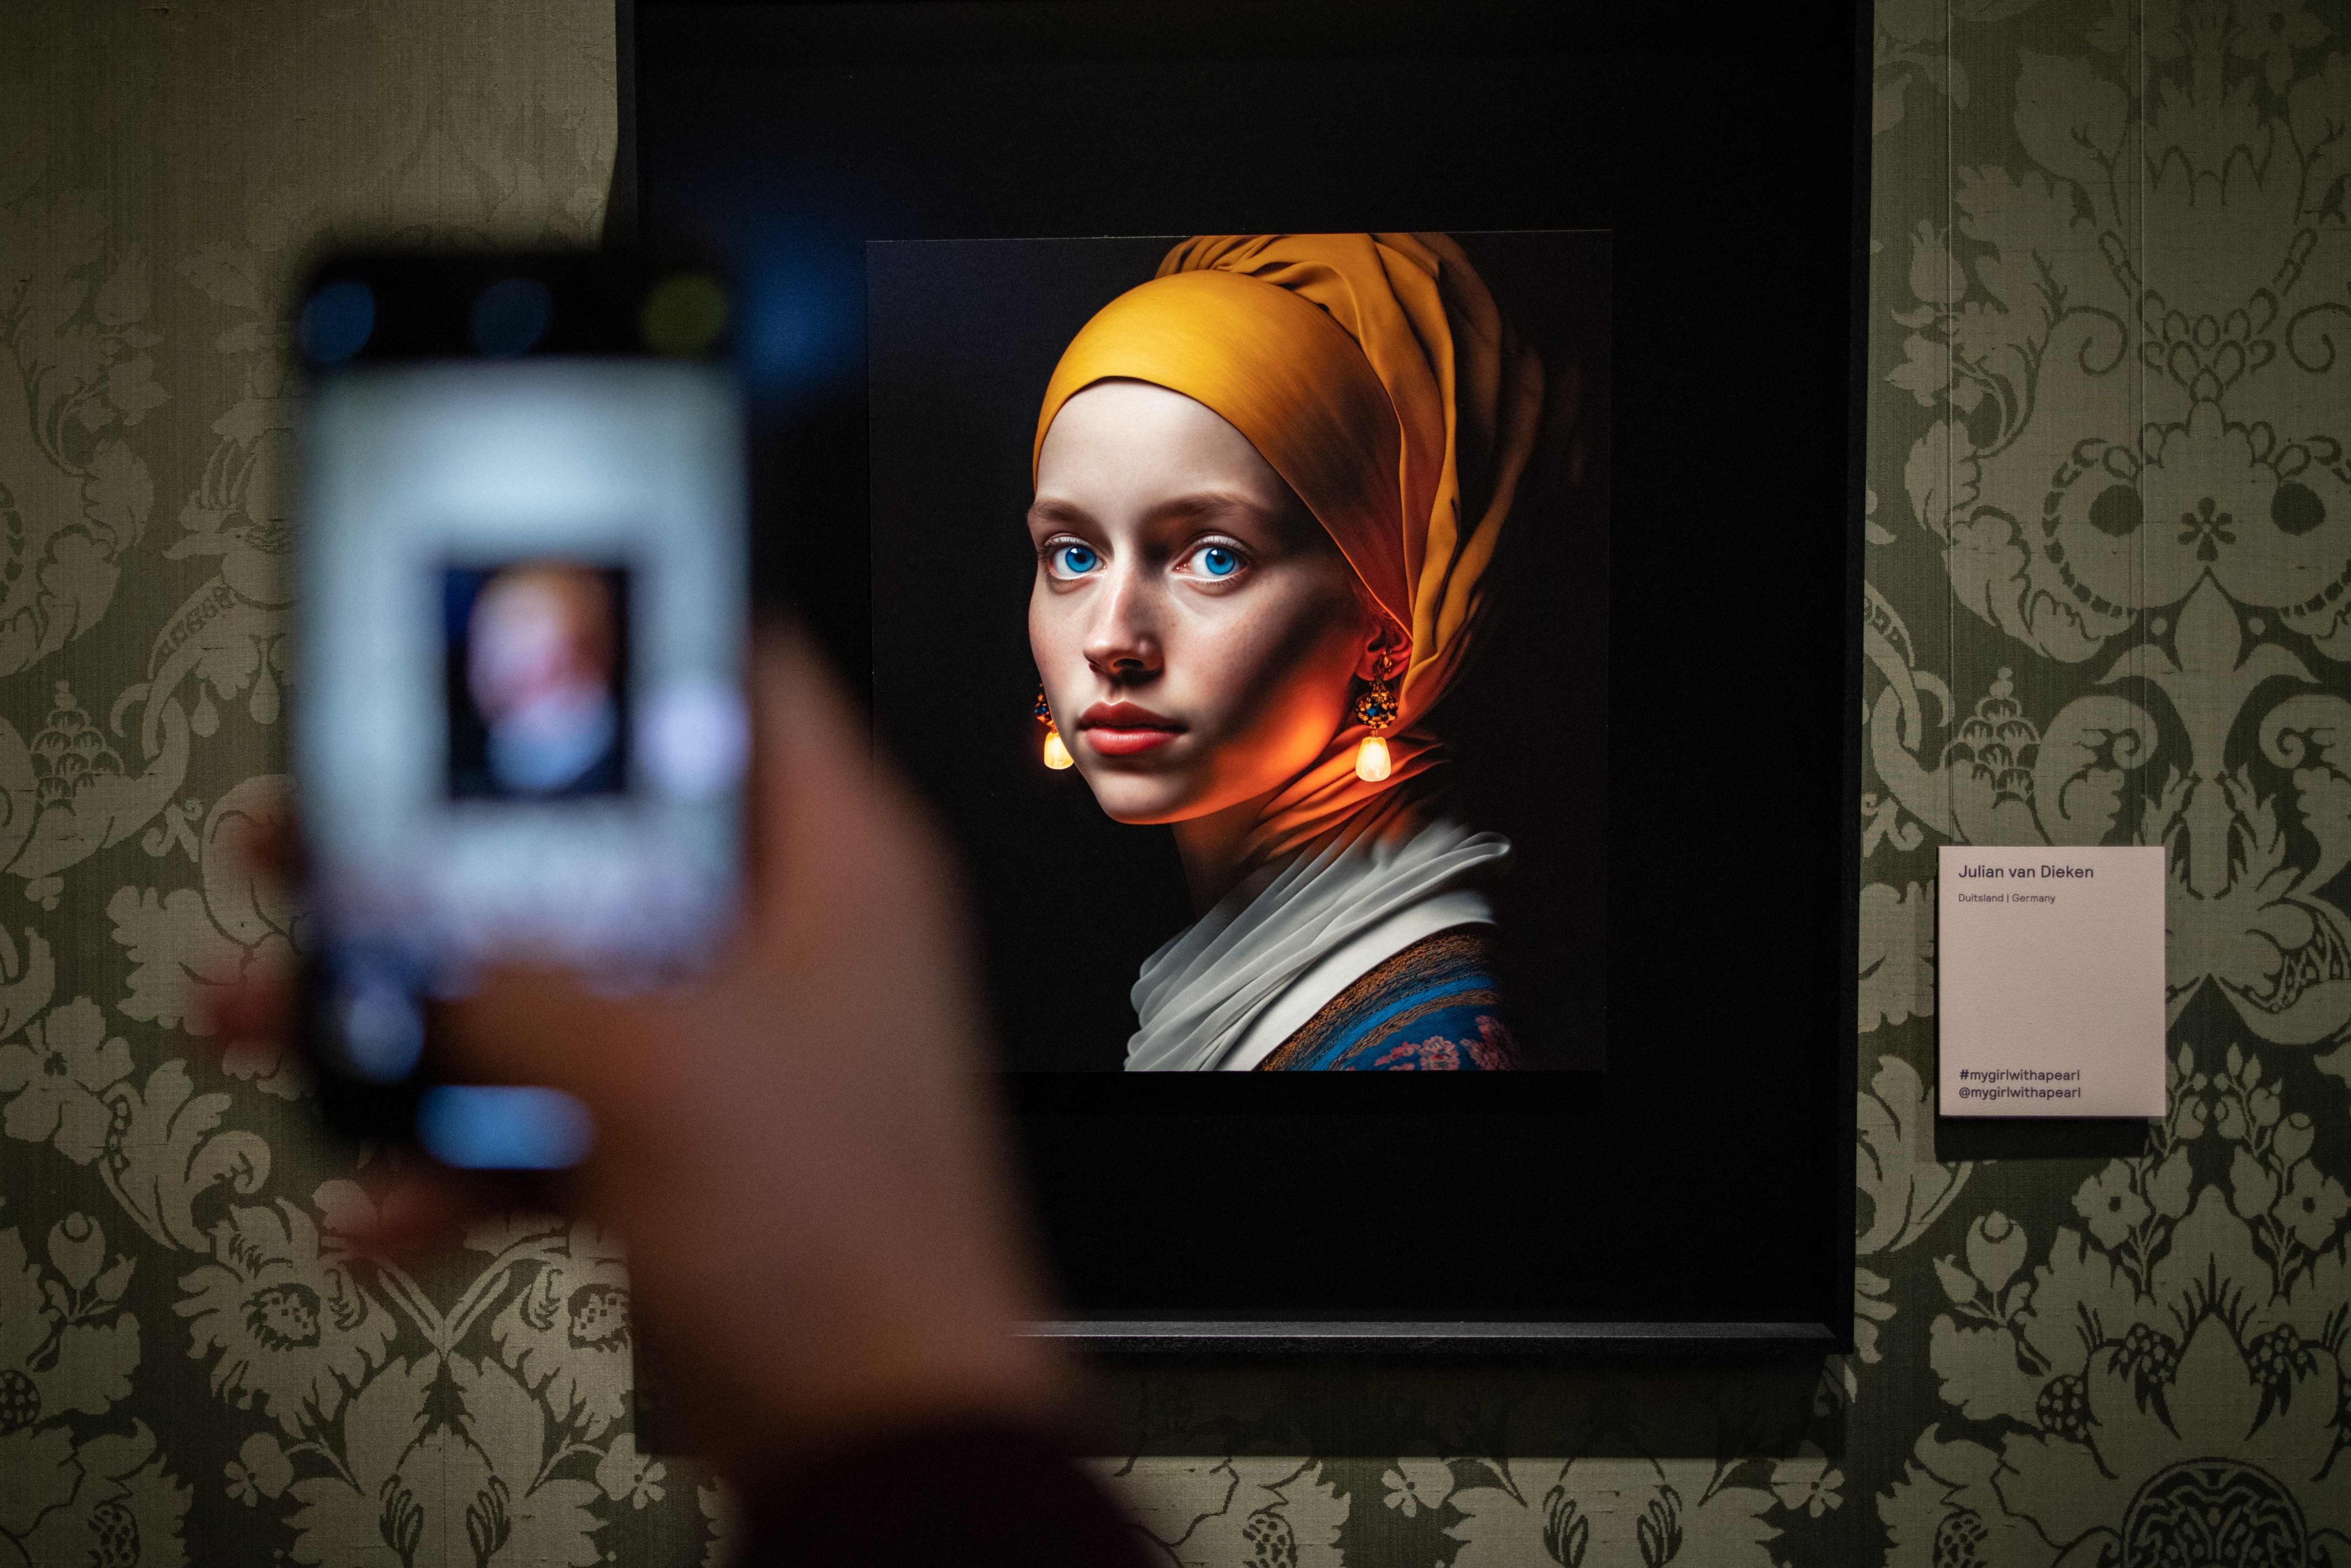 A visitor takes a picture with his mobile phone of an image designed with artificial intelligence by Berlin-based digital creator Julian van Dieken inspired by Johannes Vermeer’s painting “Girl with a Pearl Earring” at the Mauritshuis museum in The Hague on March 9. Photo: AFP